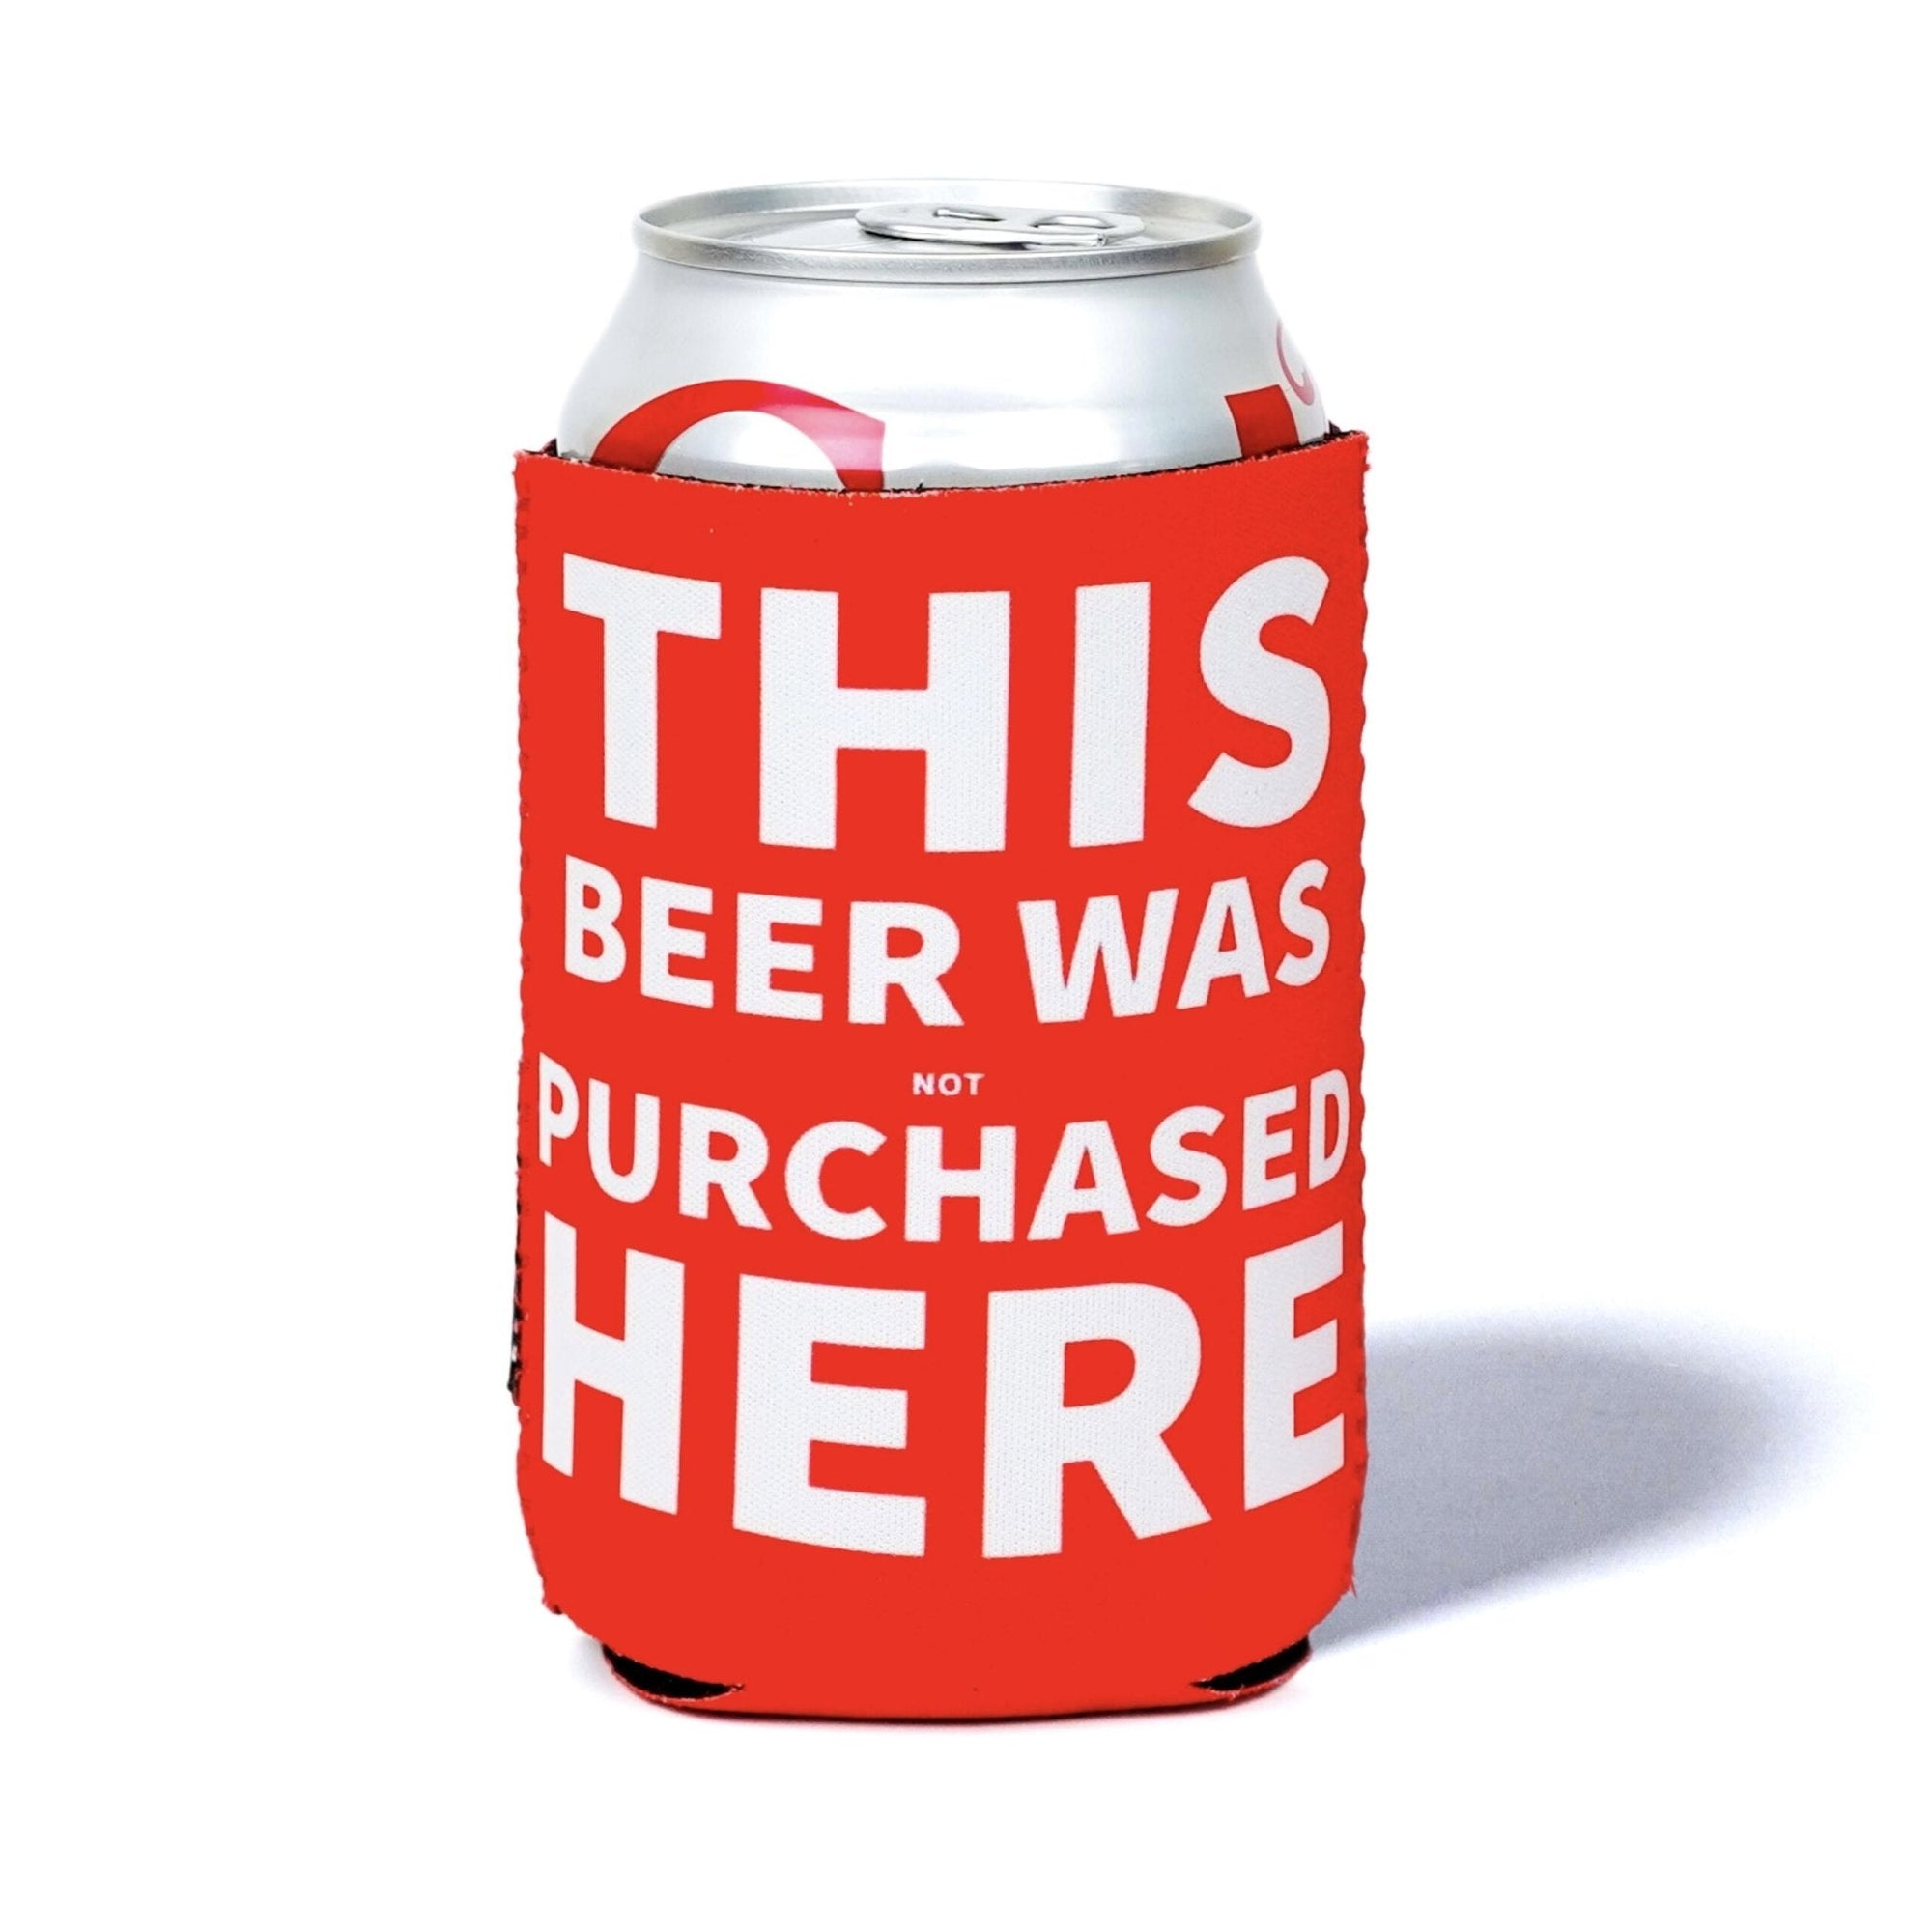 THIS BEER WAS not PURCHASED HERE - Can Sleeve